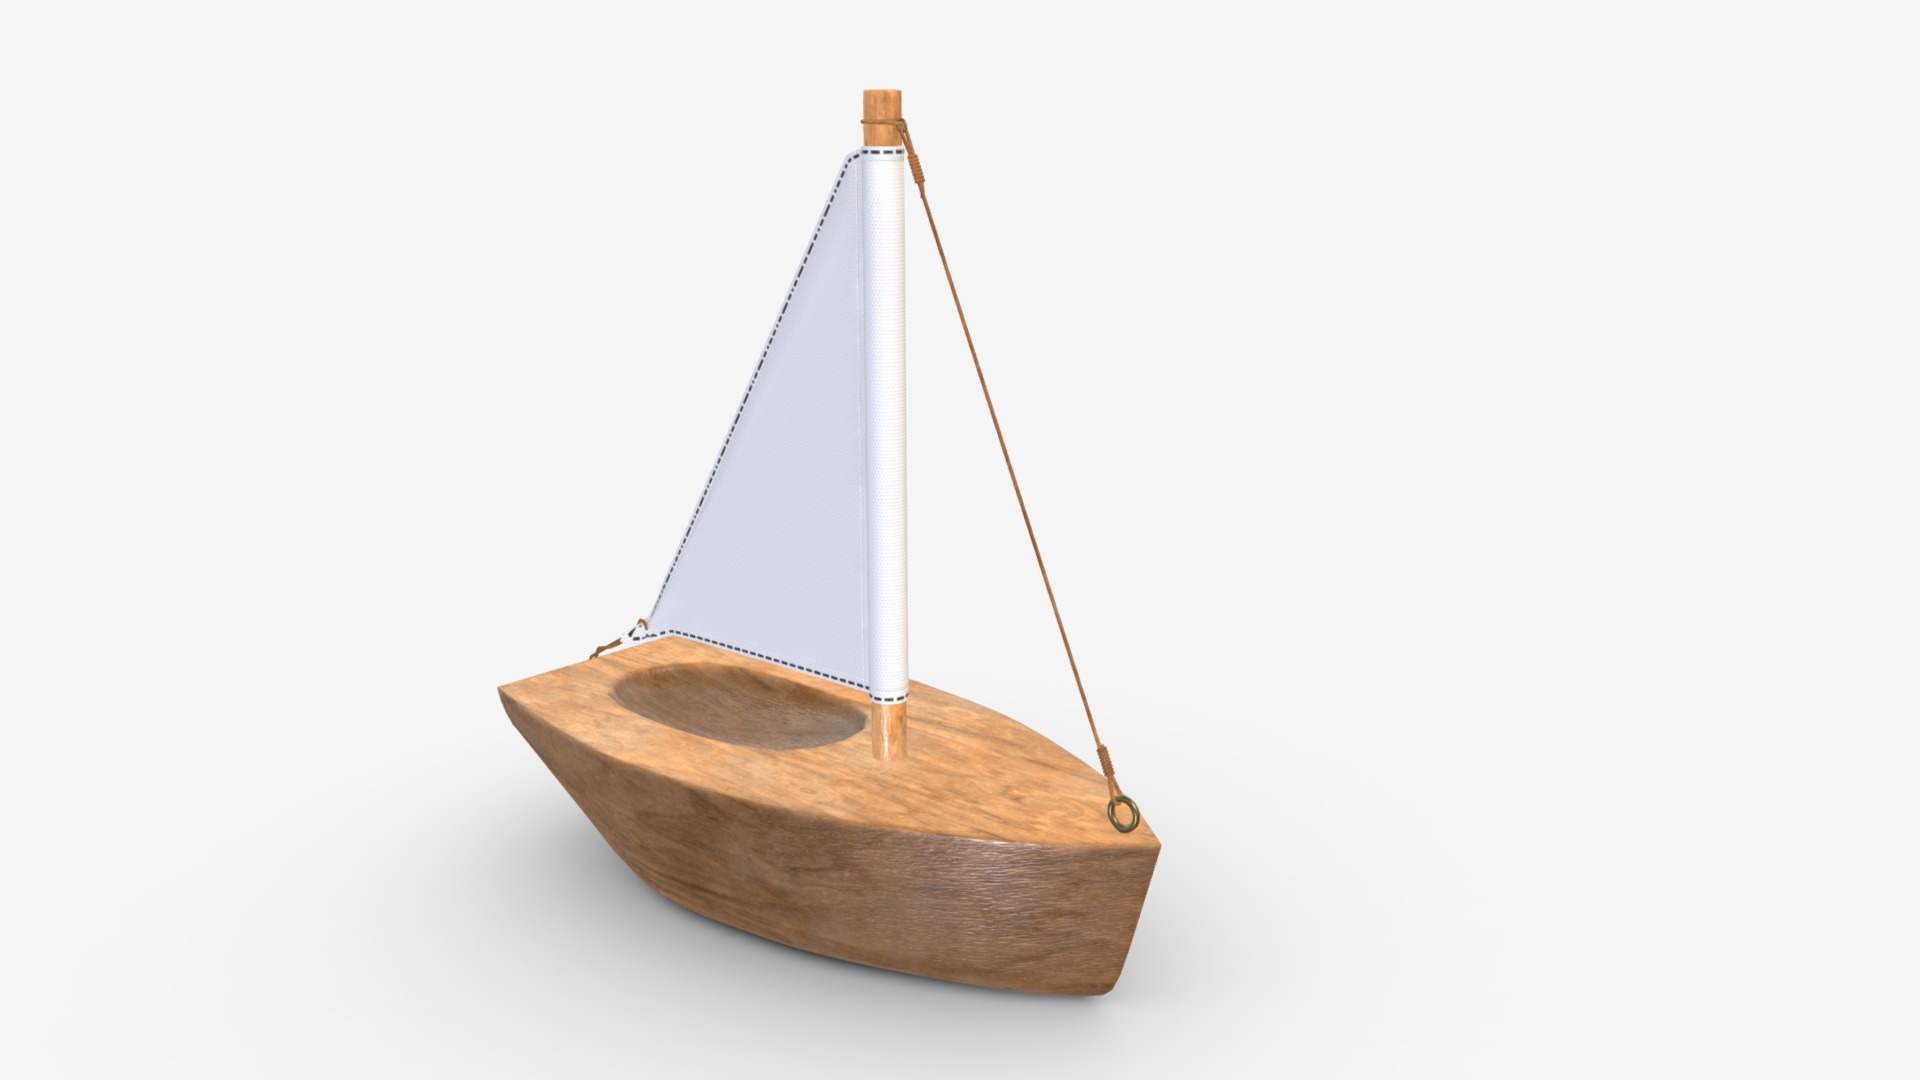 3D model Wooden sailboat - This is a 3D model of the Wooden sailboat. The 3D model is about a wooden boat on a stand.